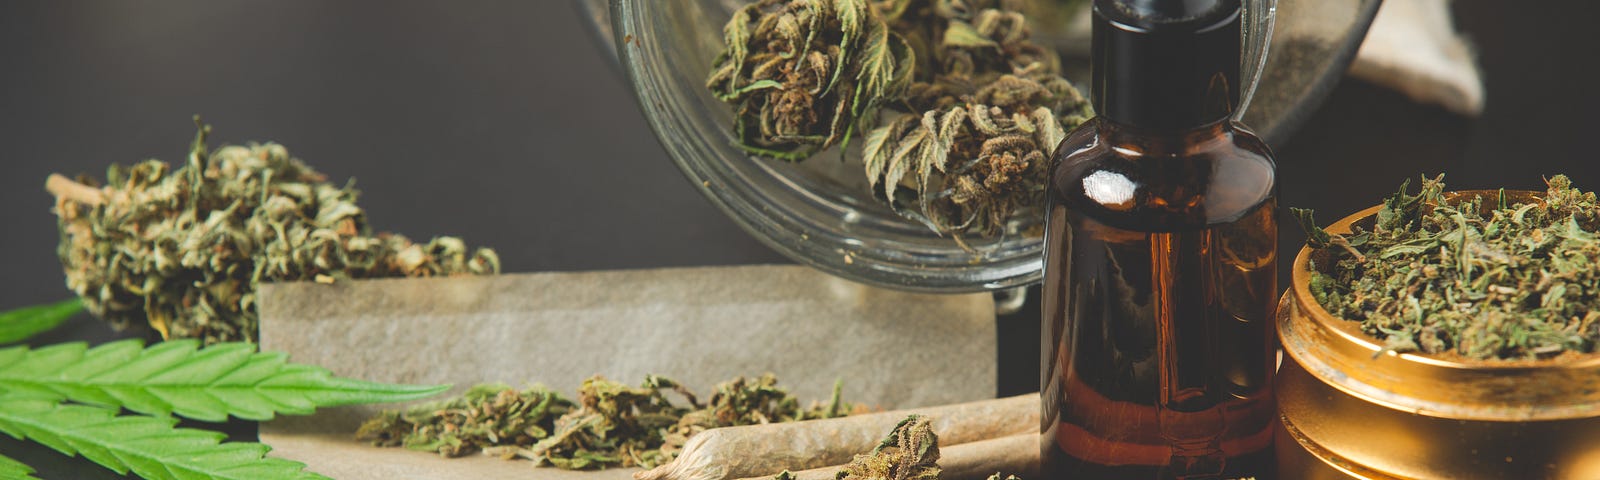 various forms of marijuana, including loose, joints, and buds in a jar